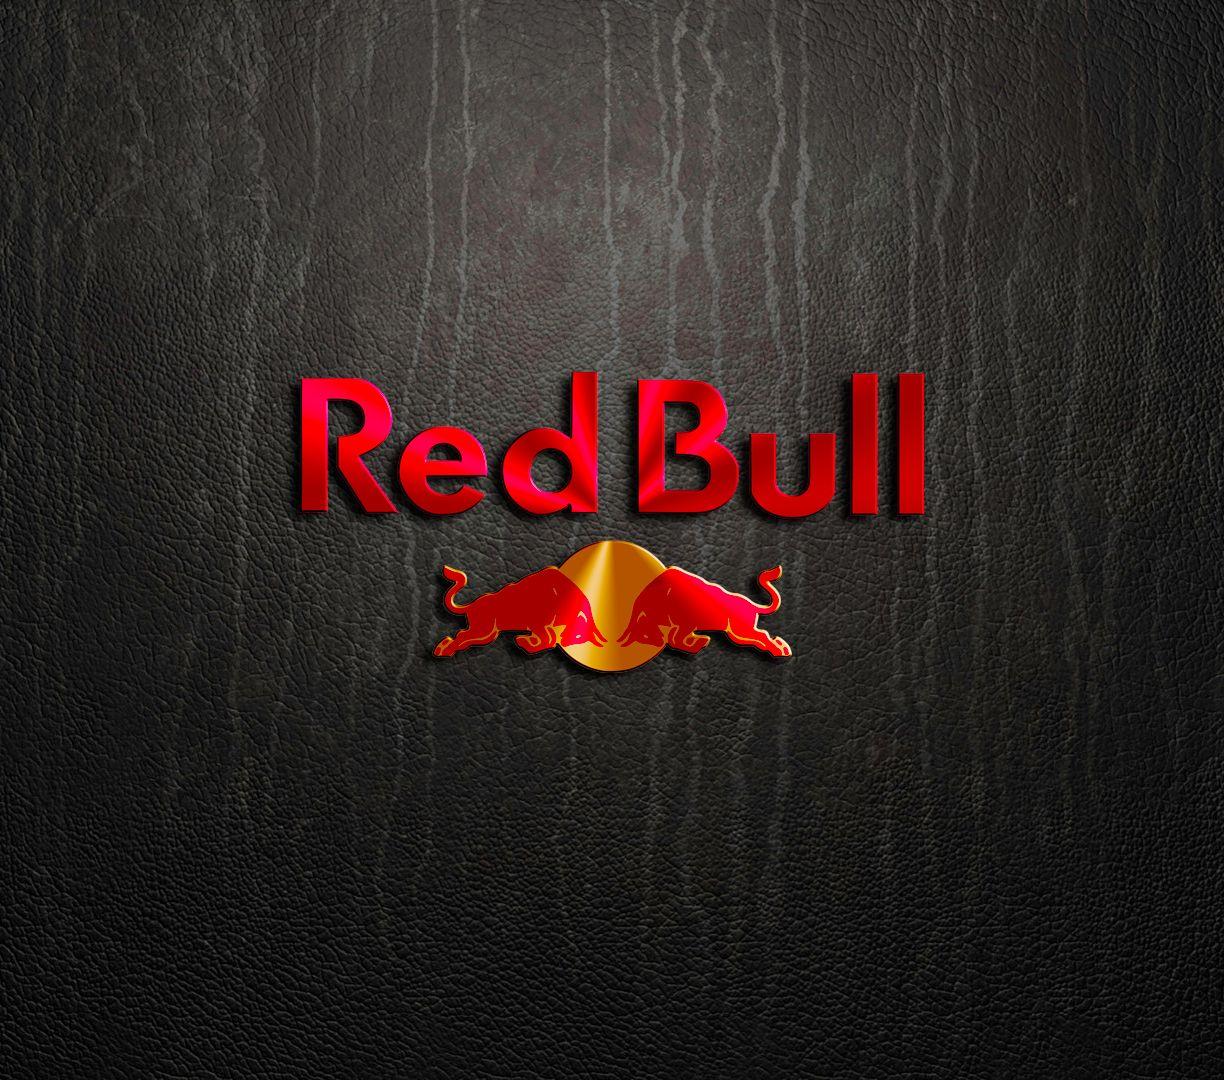 Gray and Red Bulls Logo - Michael Clark Photography - Adventure Sports Photographer Editorial ...